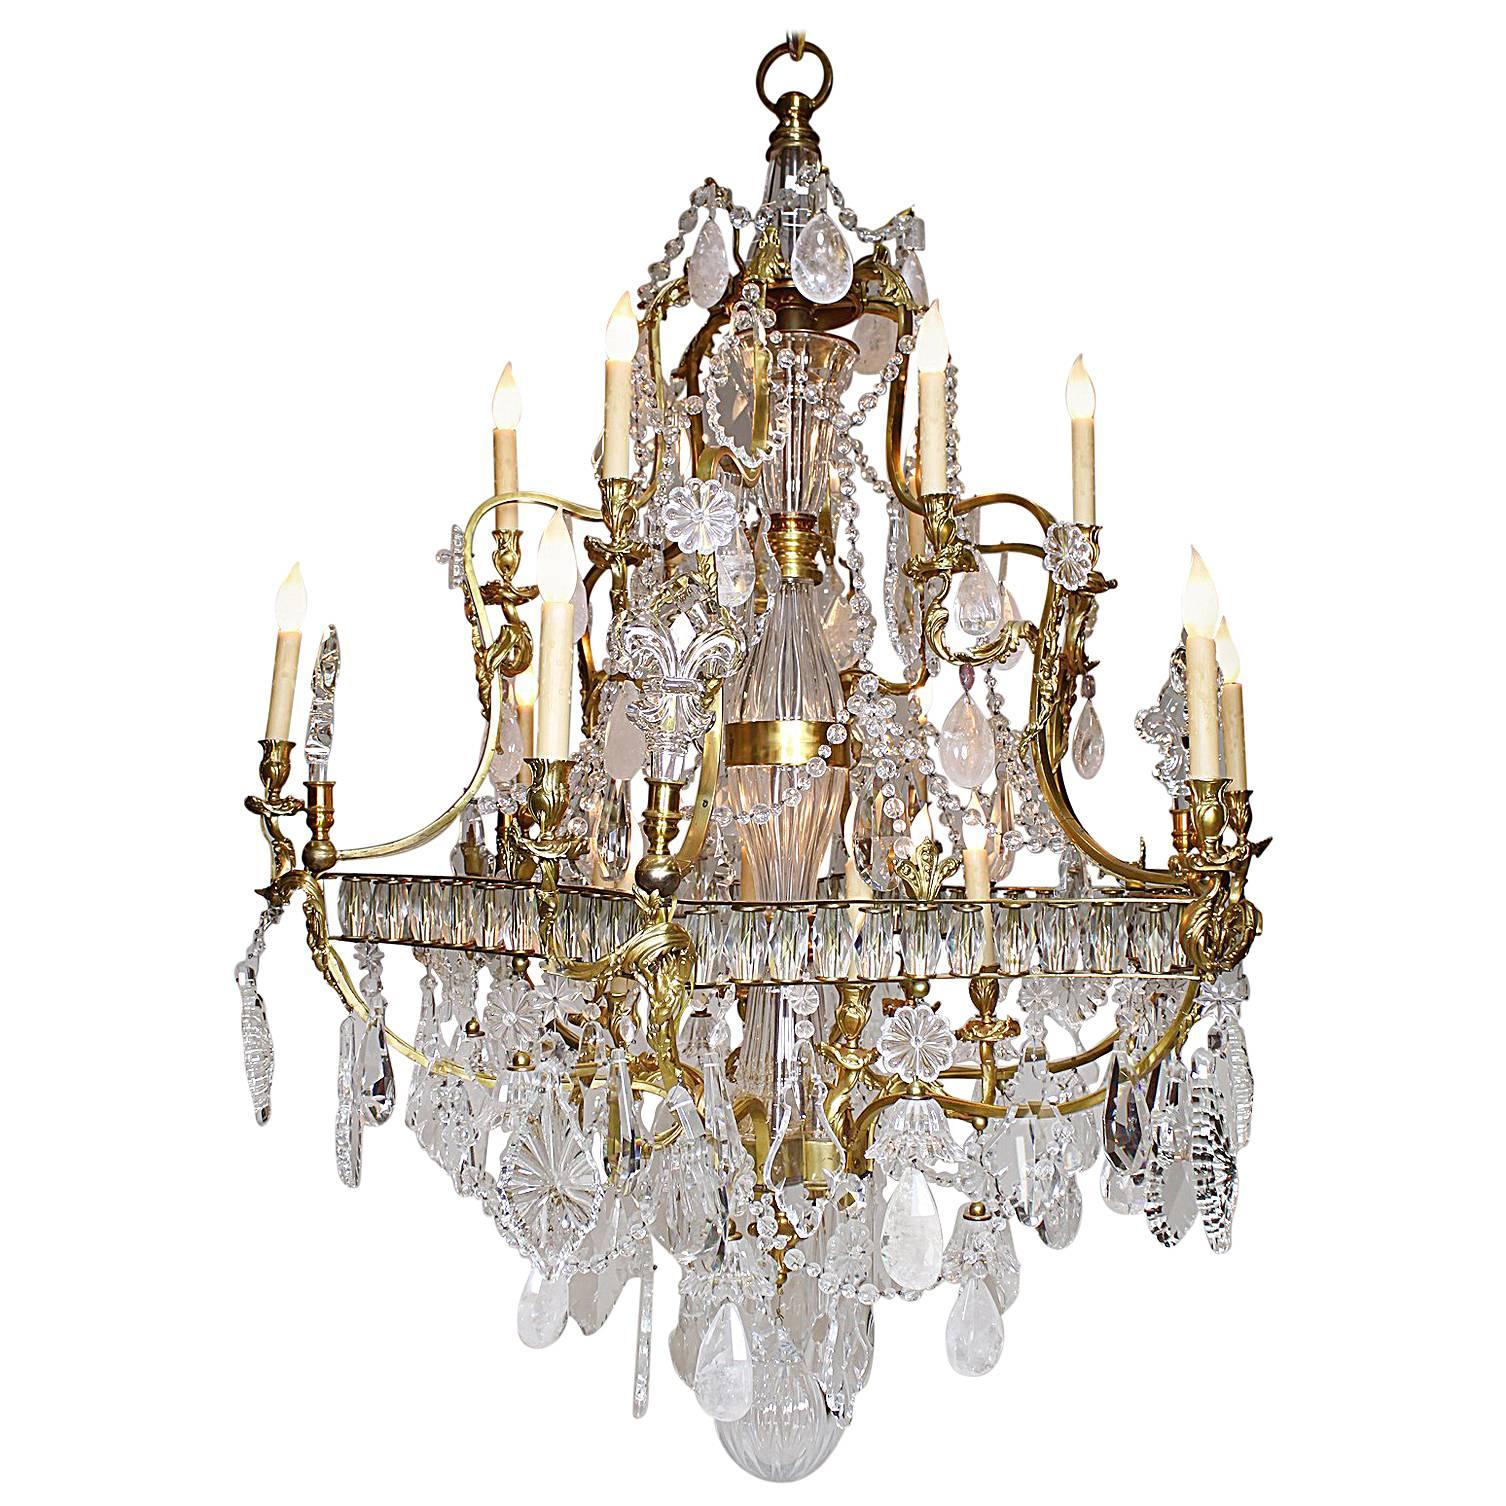 Fine French Louis XV Style Gilt-Bronze and Rock Crystal Chandelier, 20th Century